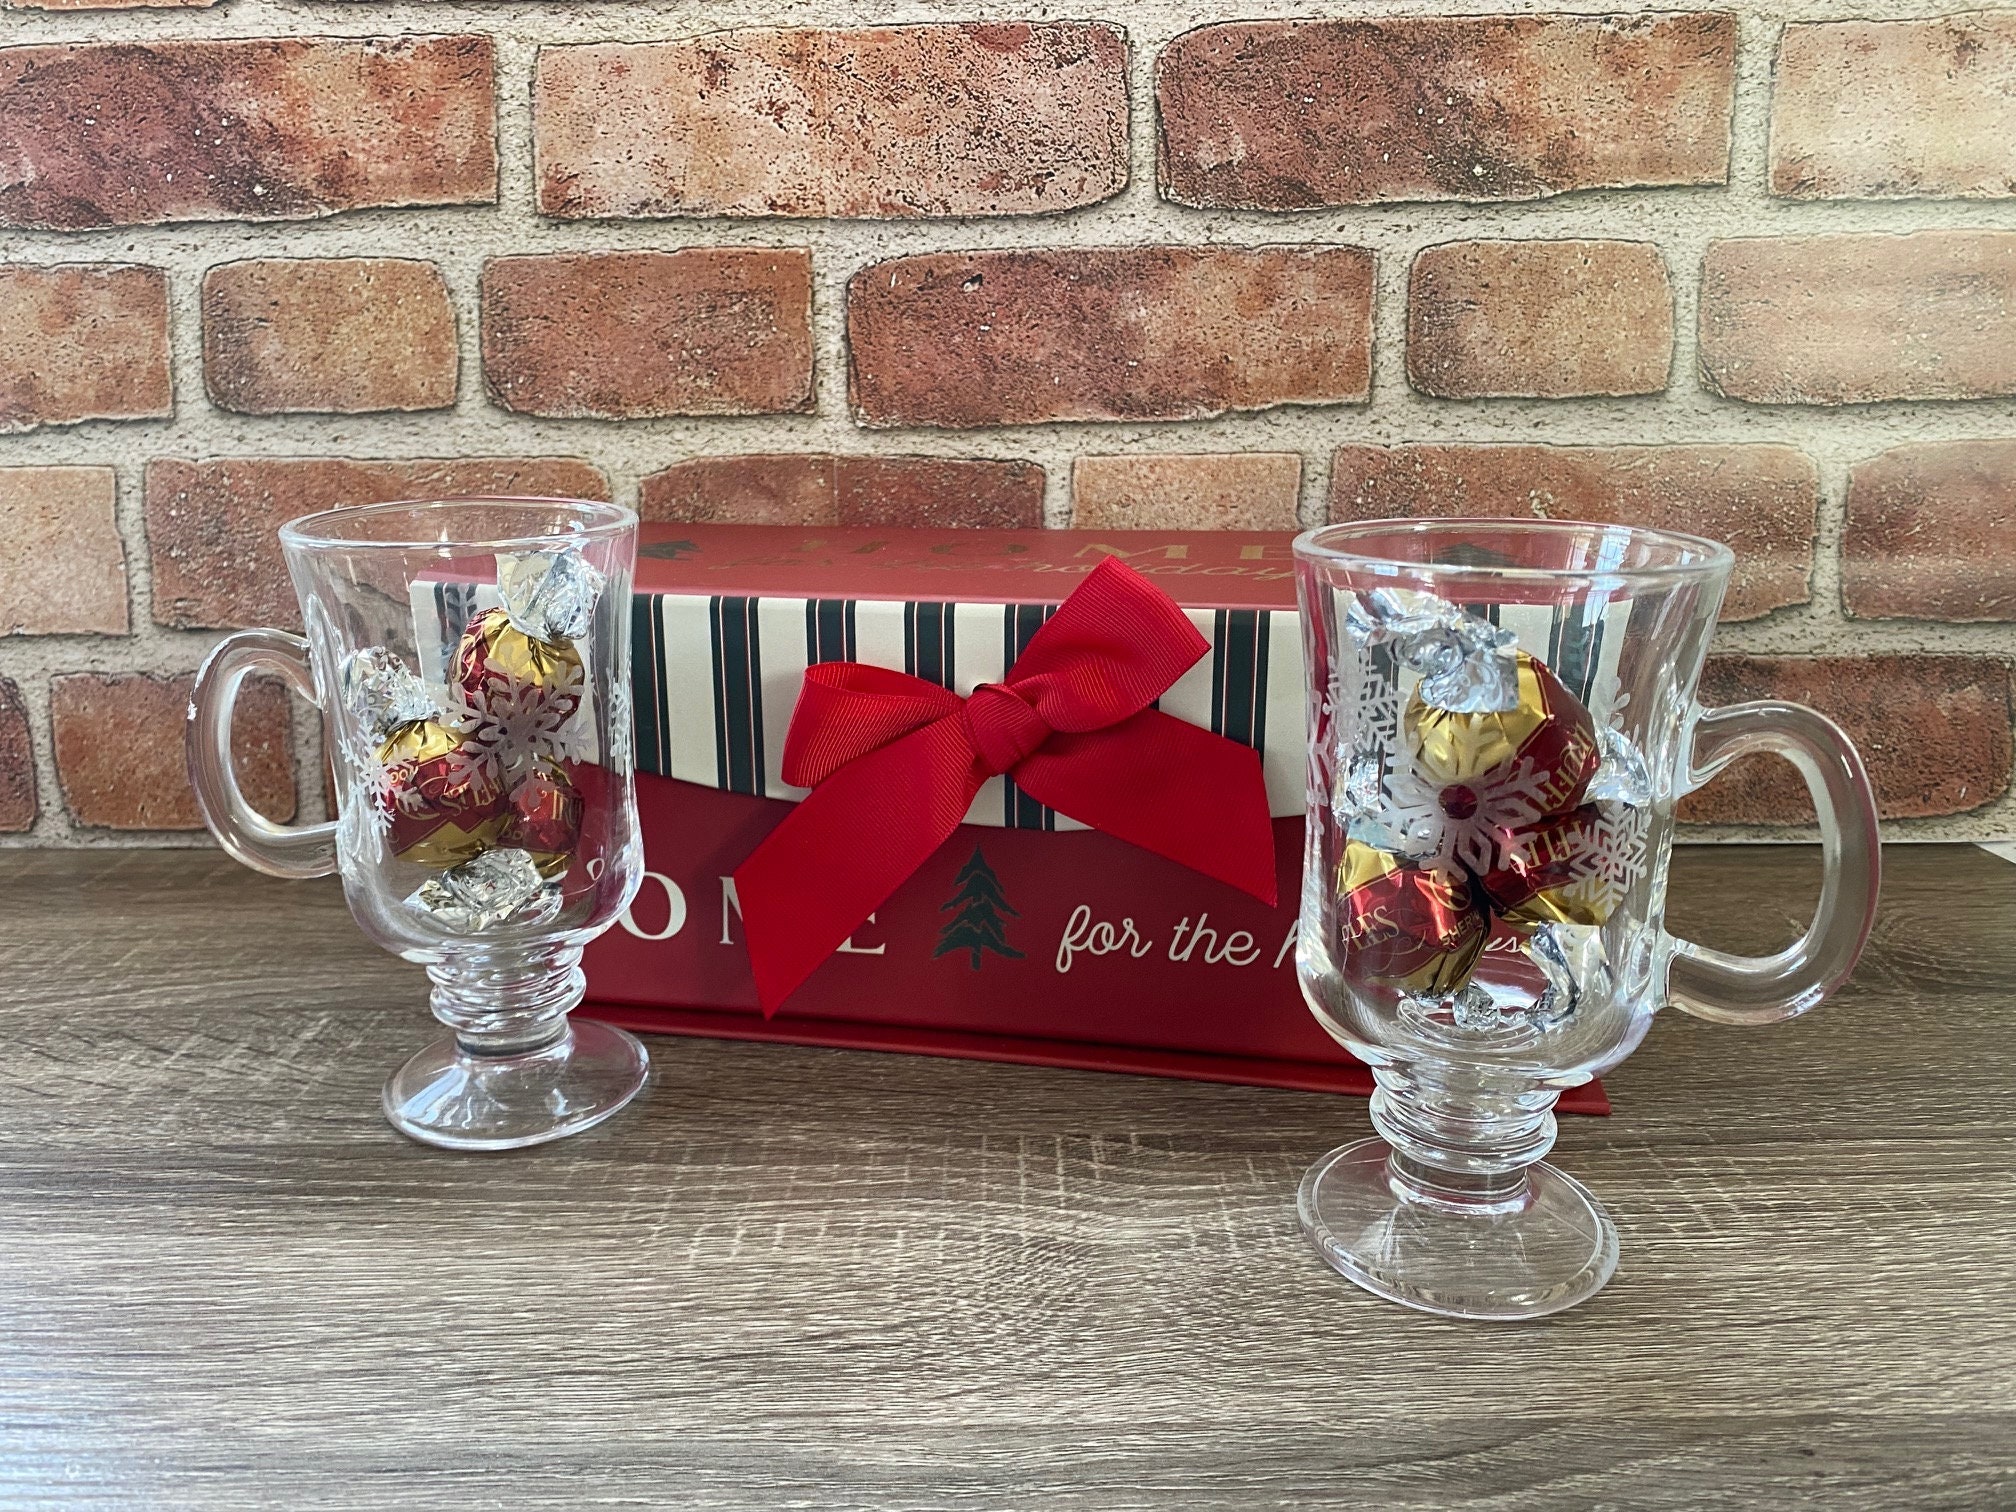 Set of Four Glass Hot Toddy Mugs - Free Shipping!